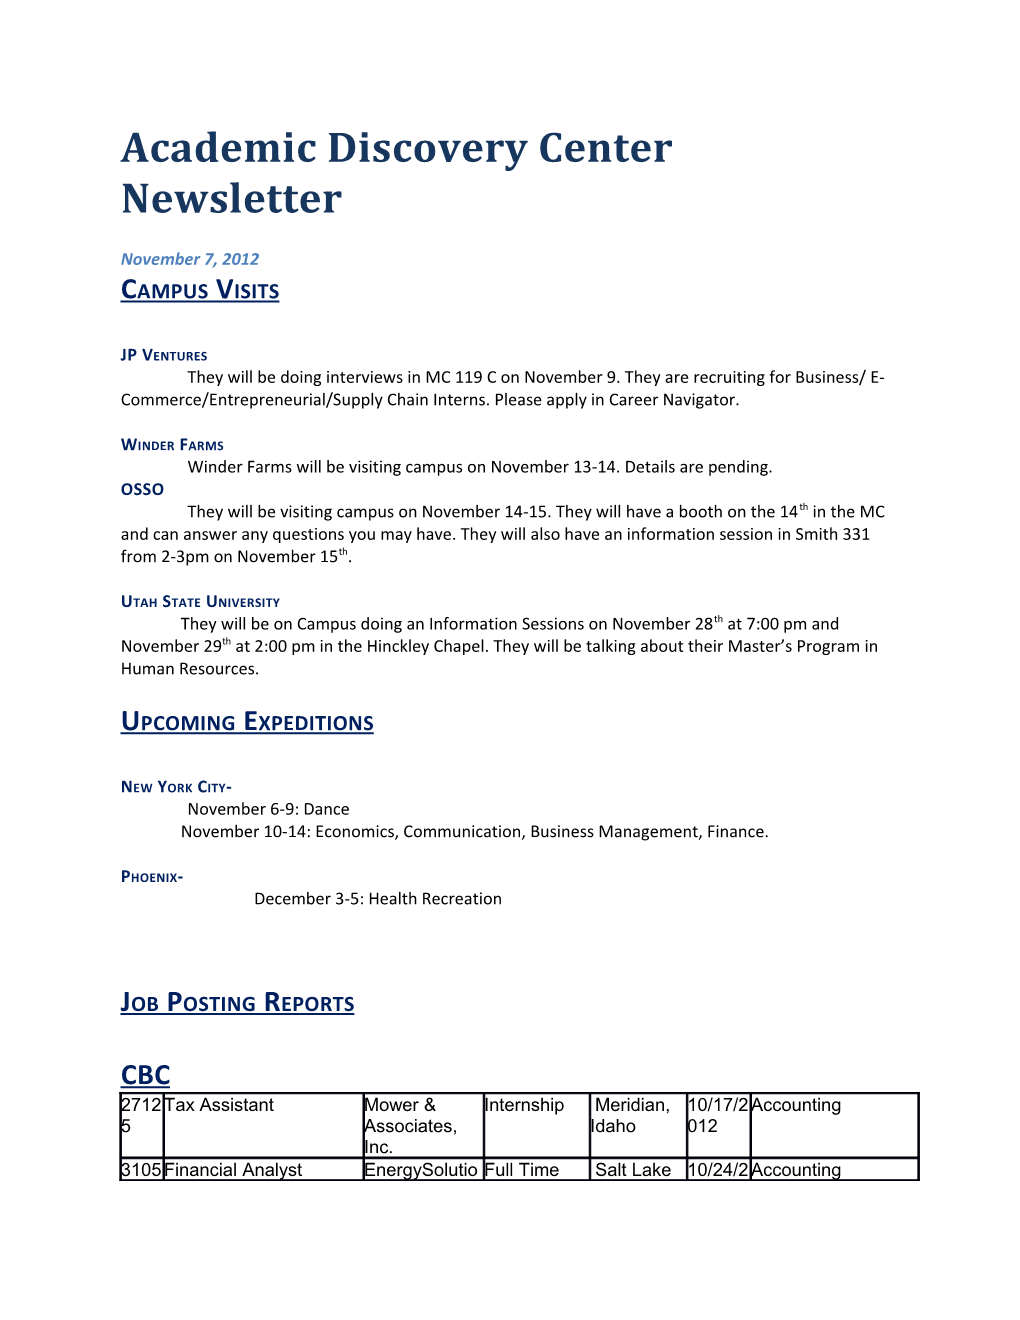 Academic Discovery Center Newsletter